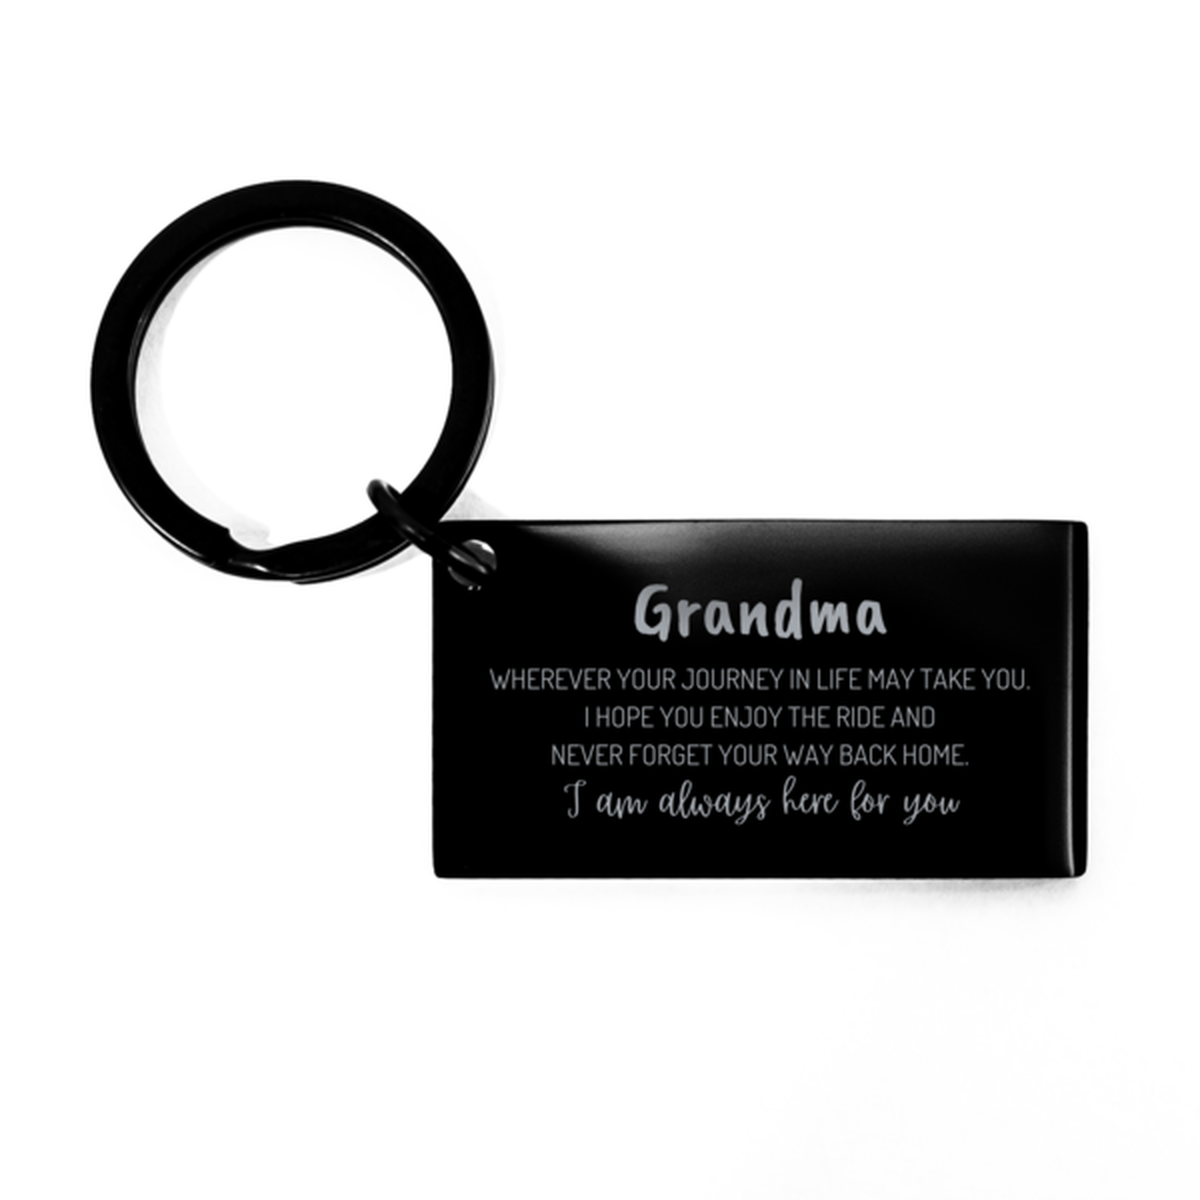 Grandma wherever your journey in life may take you, I am always here for you Grandma Keychain, Awesome Christmas Gifts For Grandma, Grandma Birthday Gifts for Men Women Family Loved One